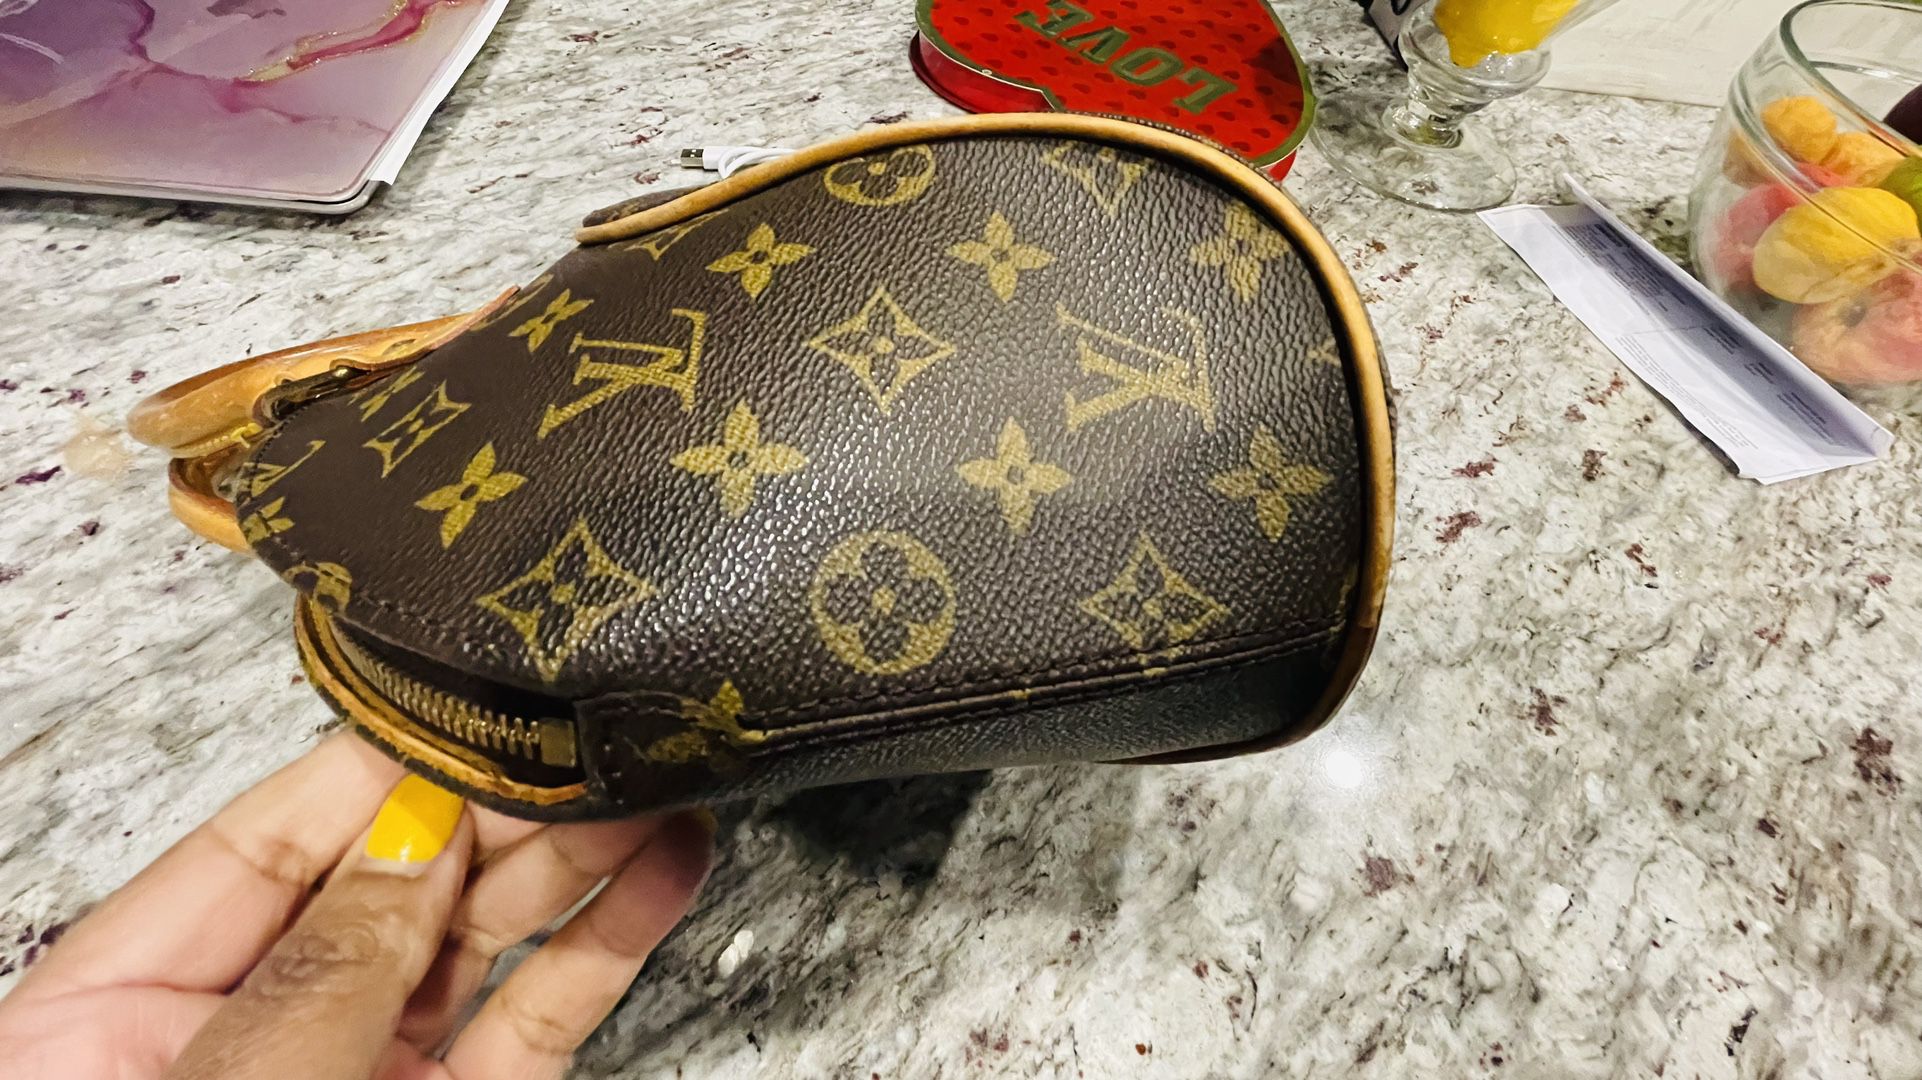 Original Louis Vuitton looping bag for Sale in Mesquite, TX - OfferUp